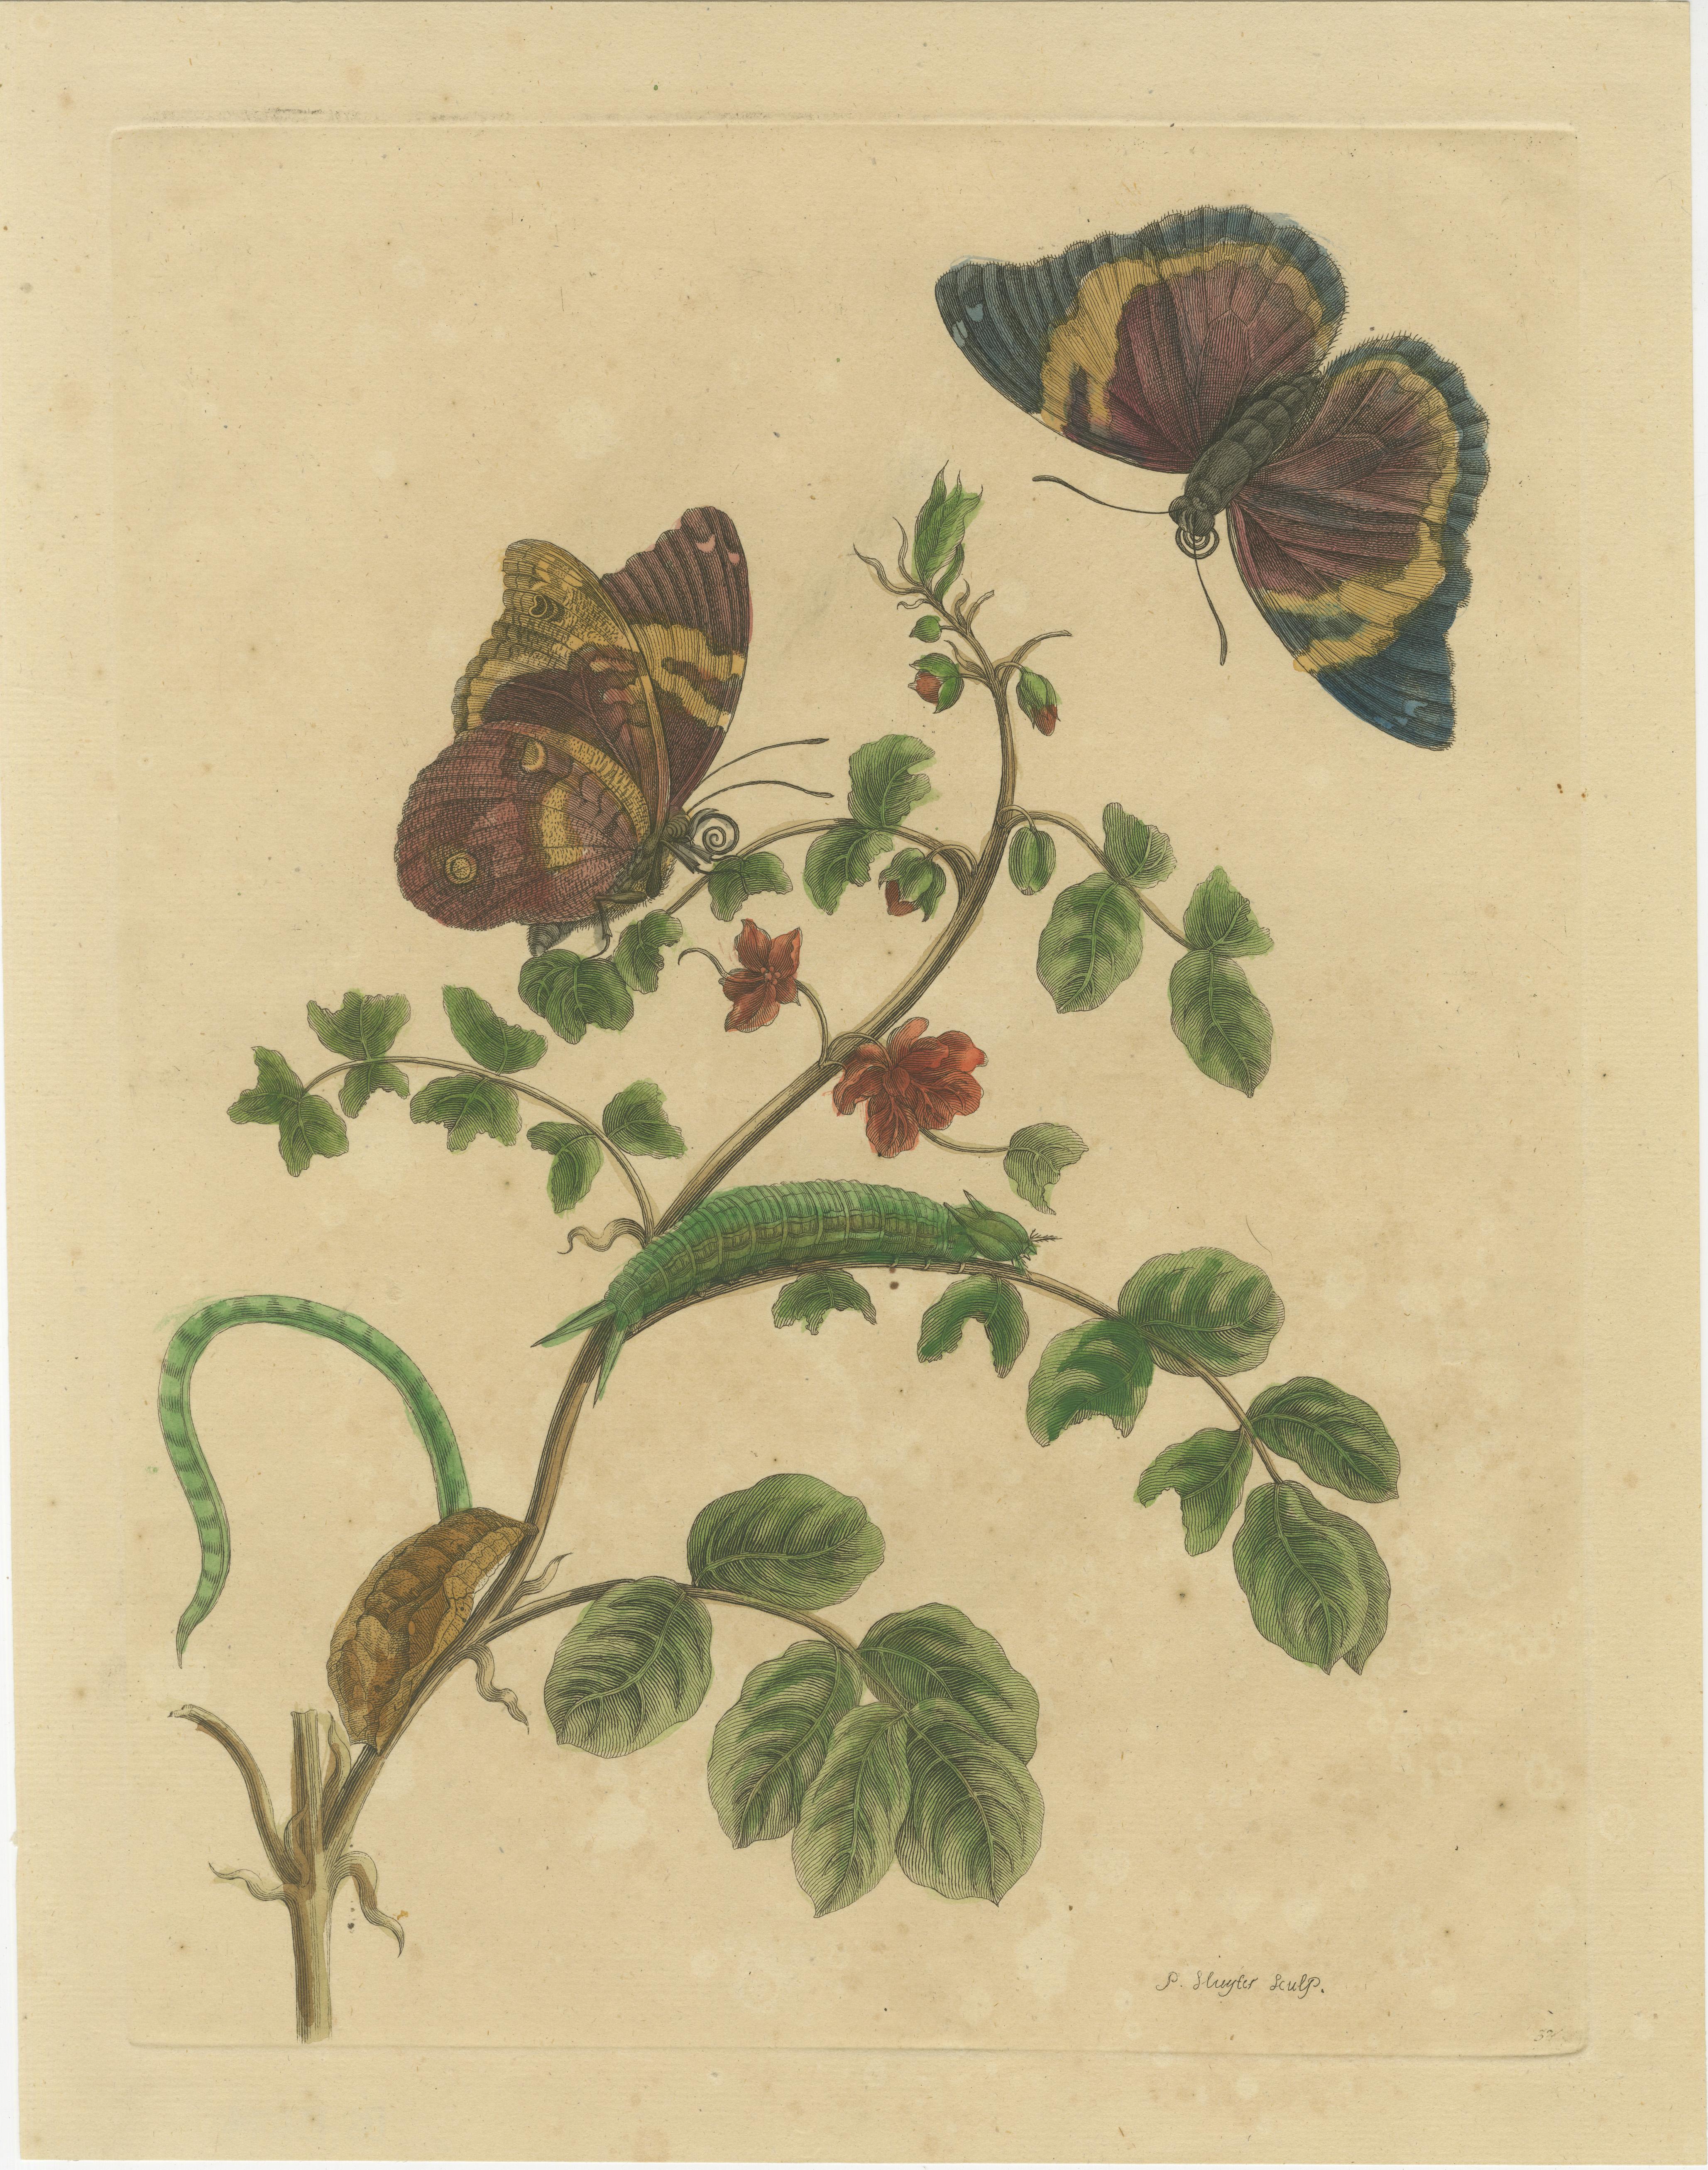 Paper Metamorphosis of Surinamese Insects in an Original Hand-Colored Engraving, 1705 For Sale